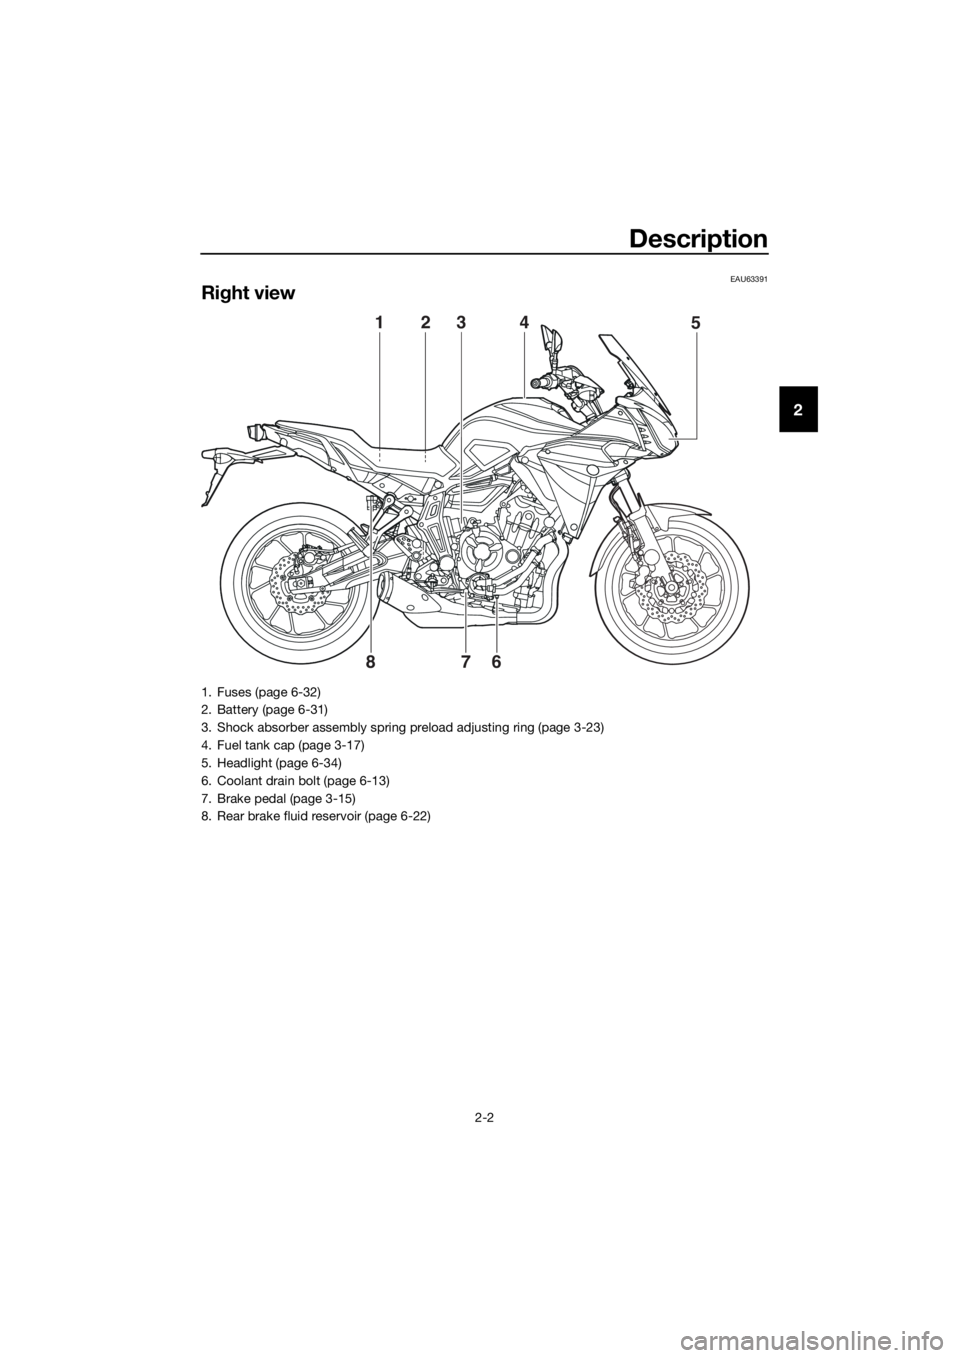 YAMAHA MT07 TRACER 2018  Owners Manual Description
2-2
2
EAU63391
Right view
215
6
7 8
34
1. Fuses (page 6-32)
2. Battery (page 6-31)
3. Shock absorber assembly spring preload adjusting ring (page 3-23)
4. Fuel tank cap (page 3-17)
5. Head